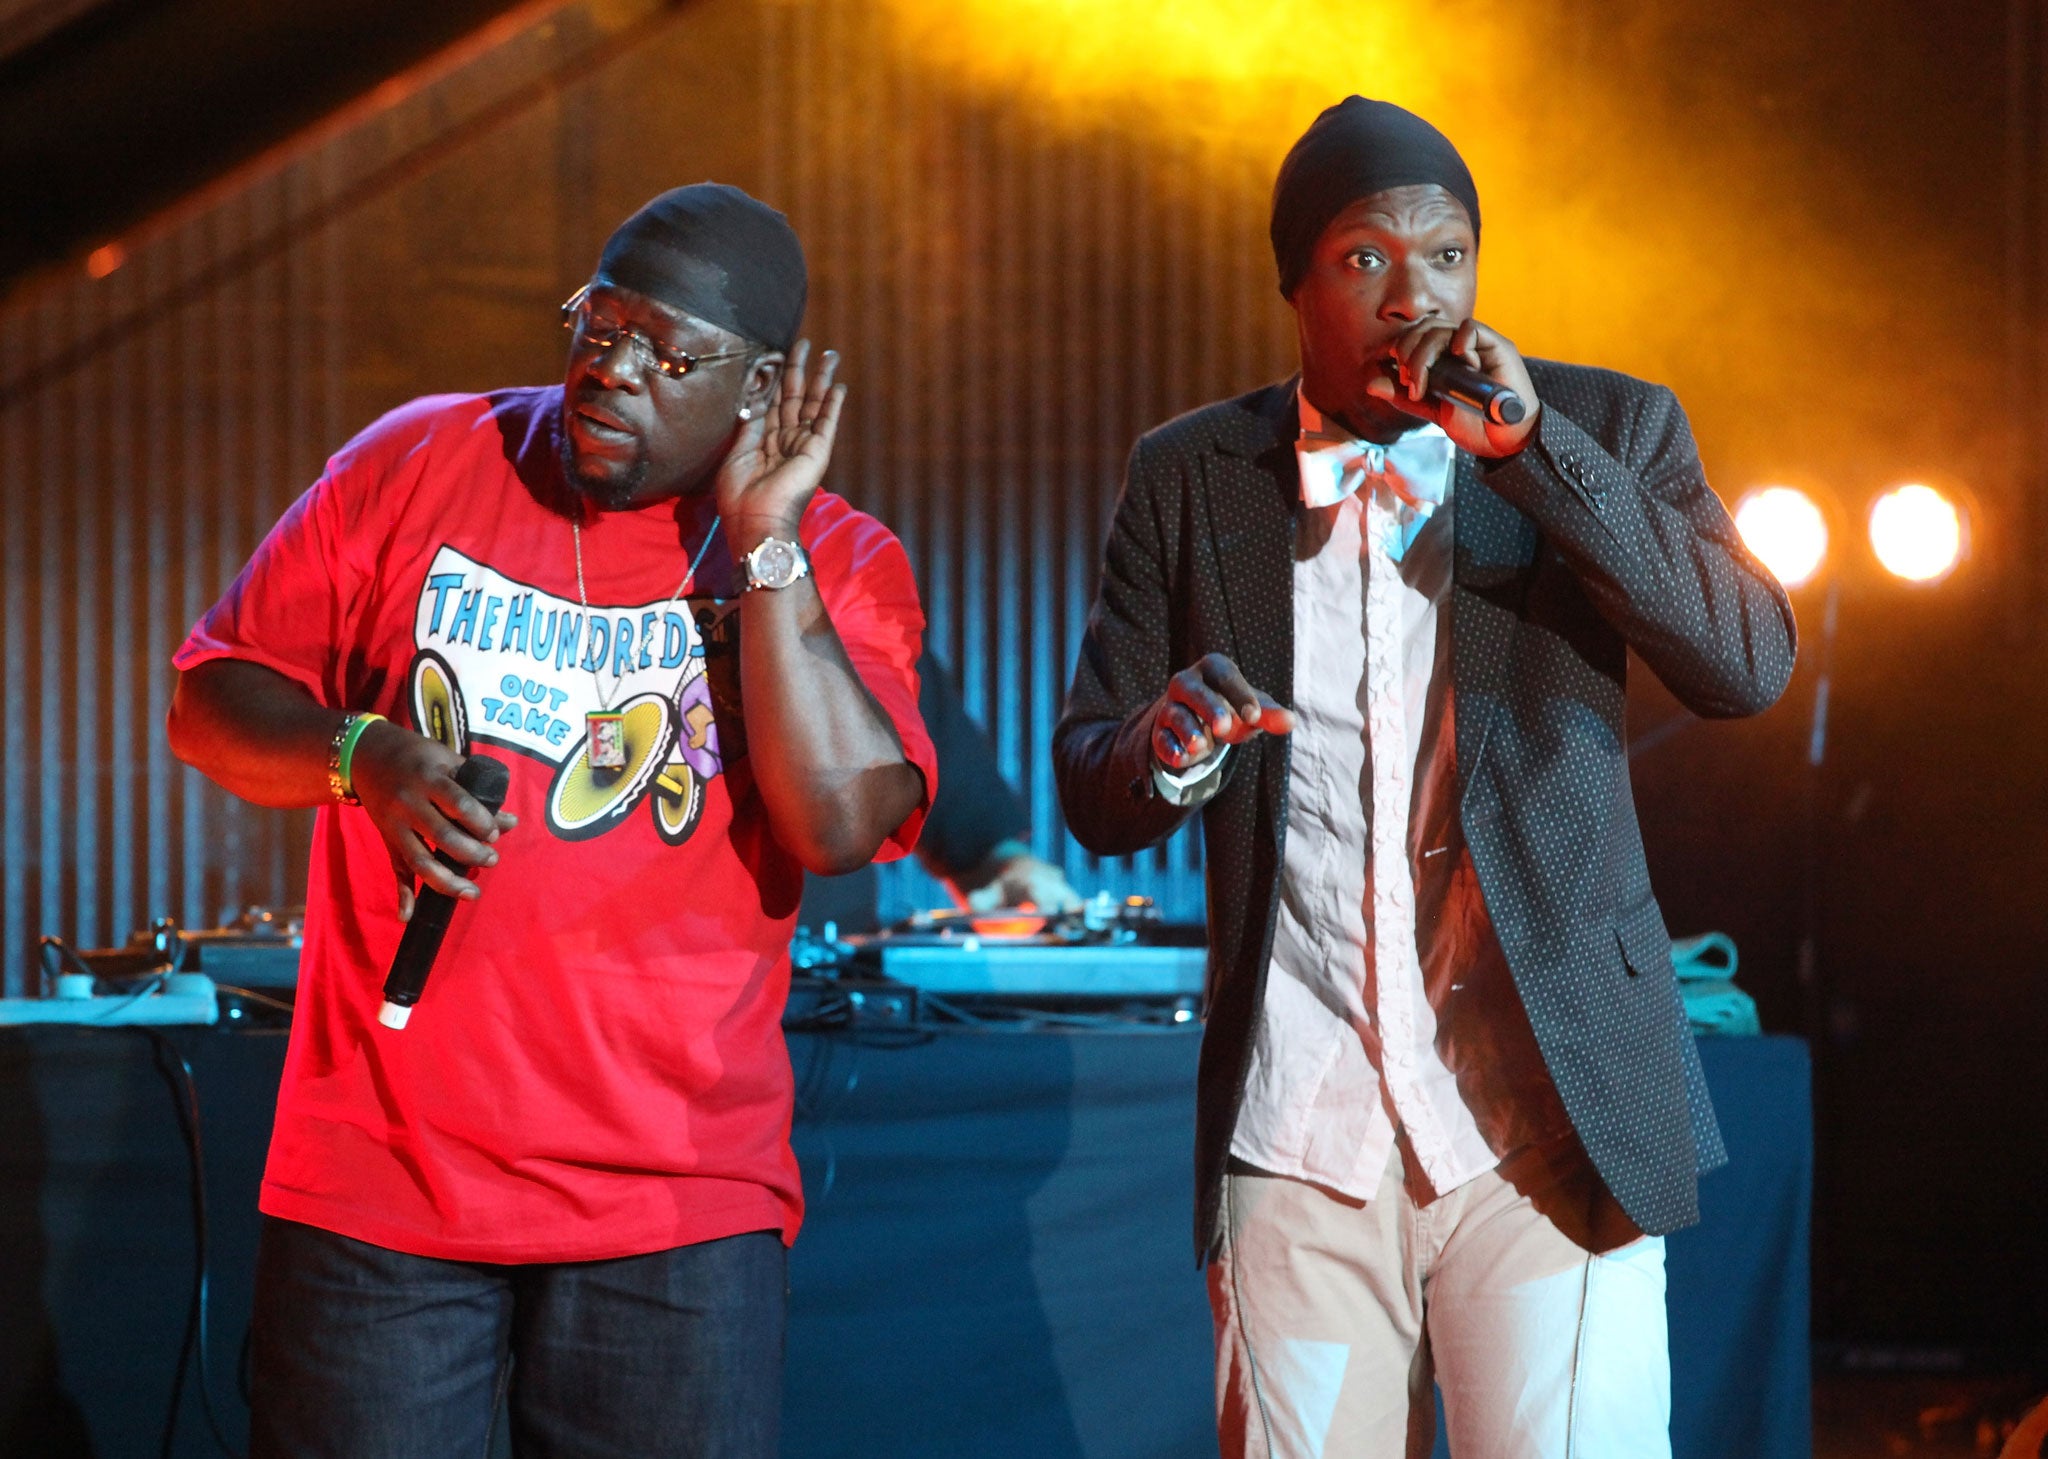 Roots Manuva performs at the Arthur's Day Guinness 250th Anniversary Celebration in Dublin (Getty)